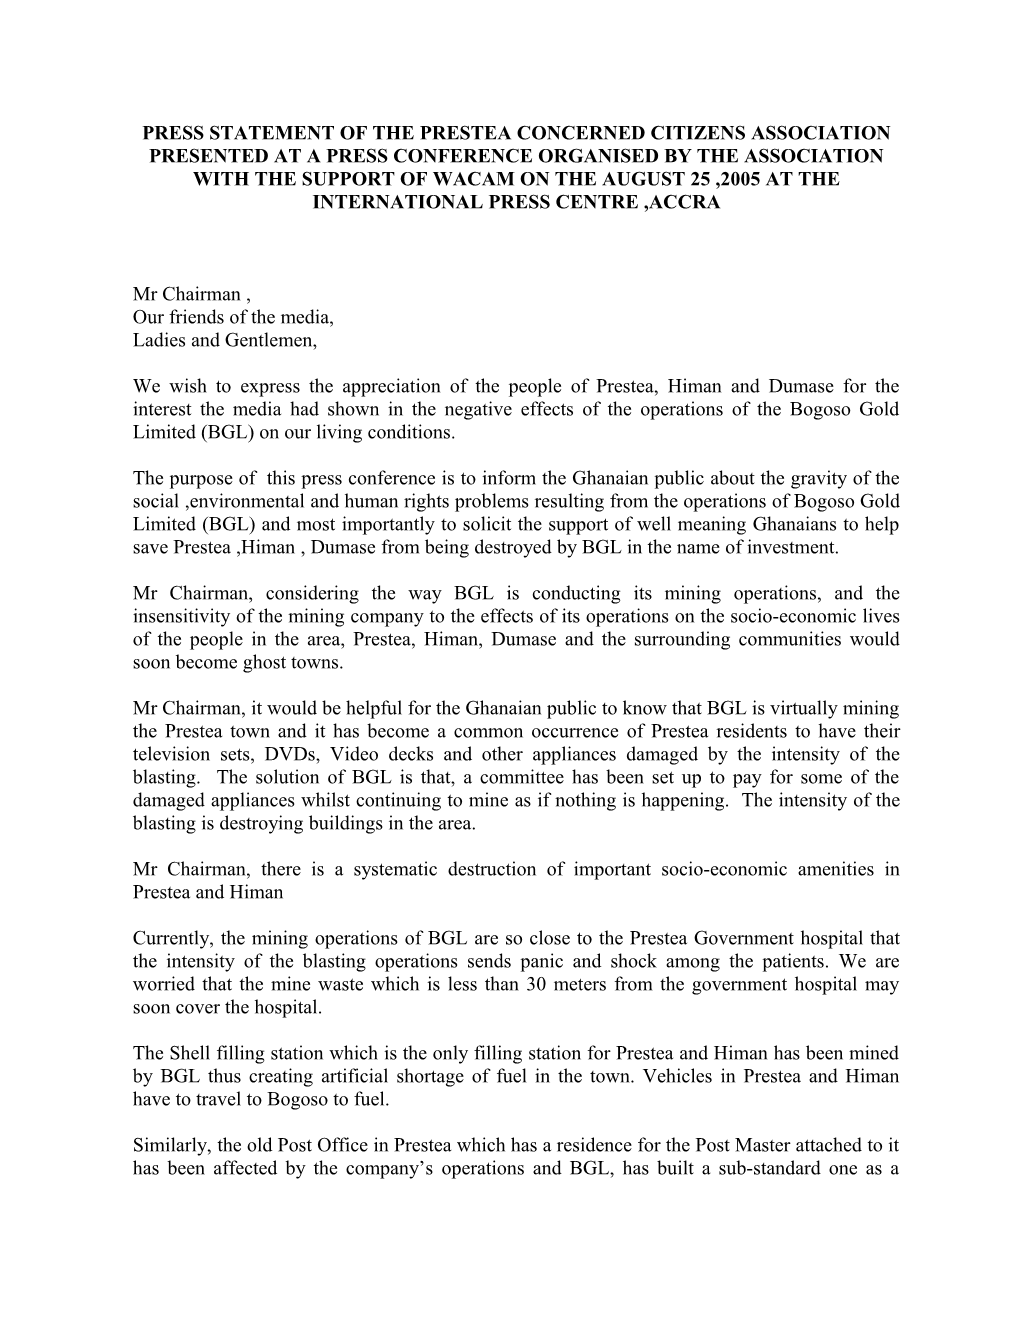 Press Statement of the Prestea Concerned Citizens Asssociation Presented at a Press Confrence